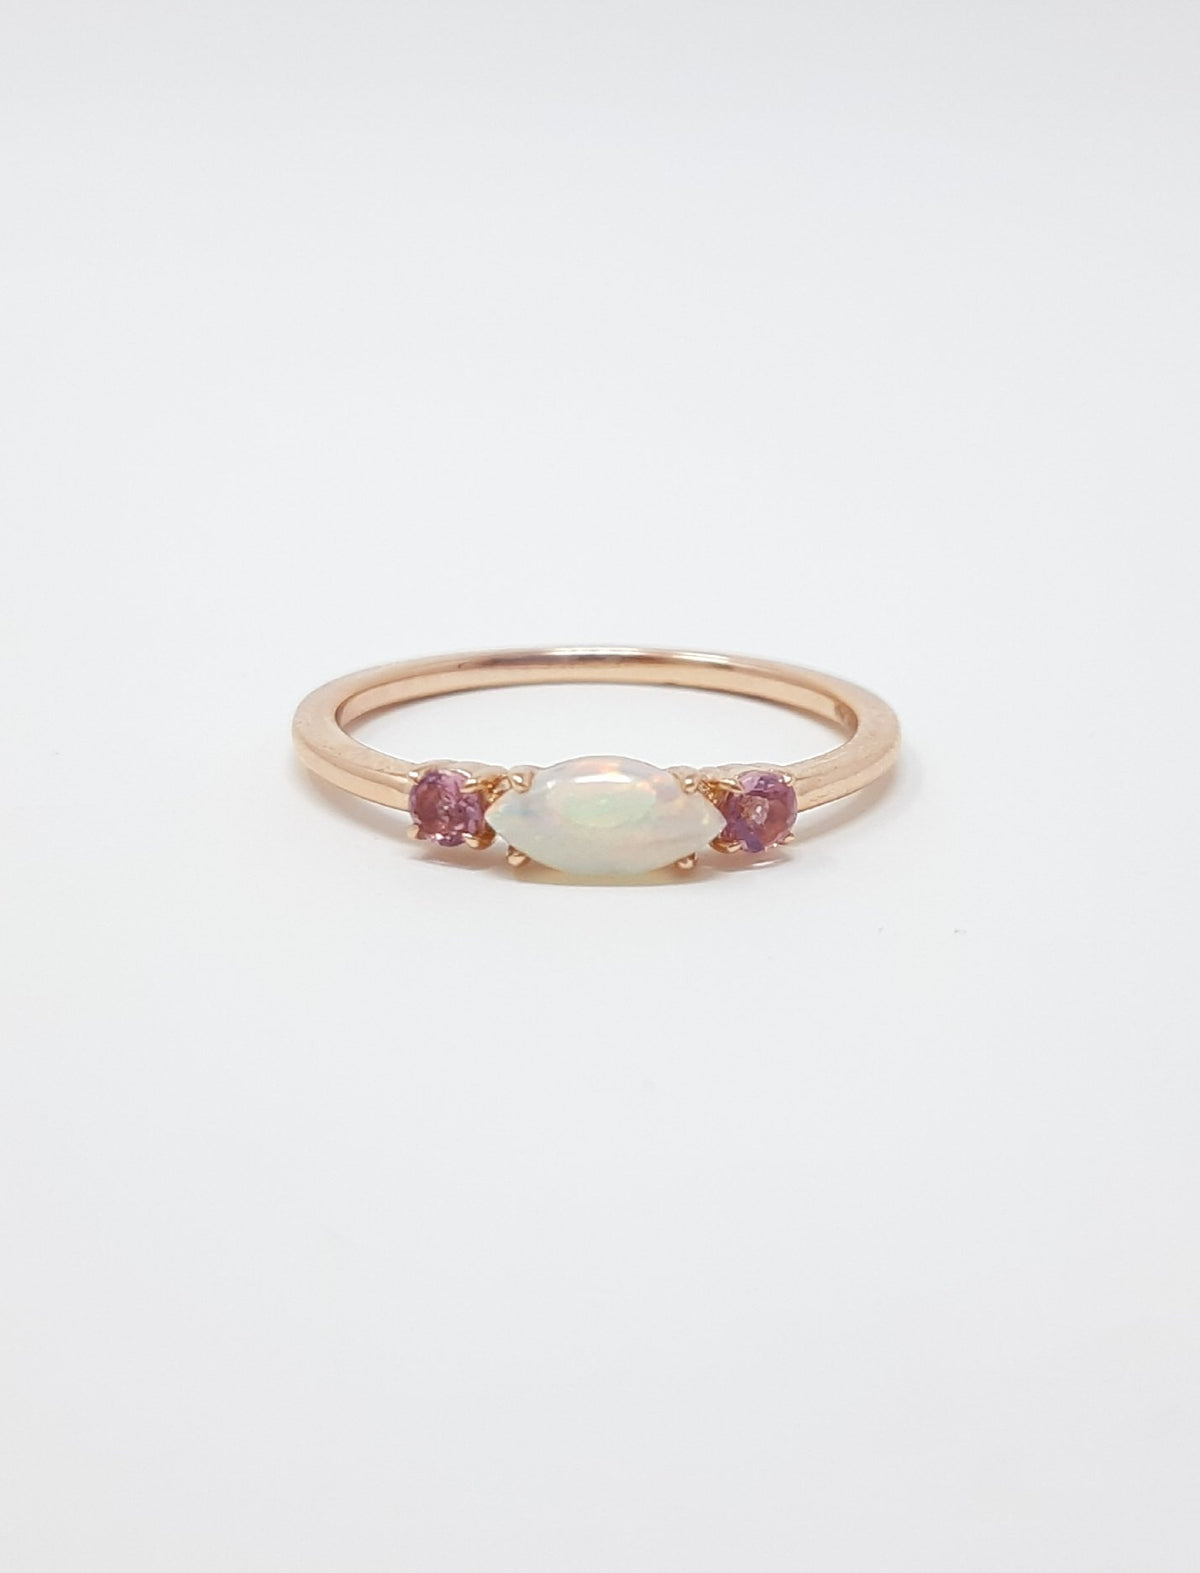 10K Rose Gold 7 x 3.25mm Opal and 2.5mm Pink Tourmaline Ring